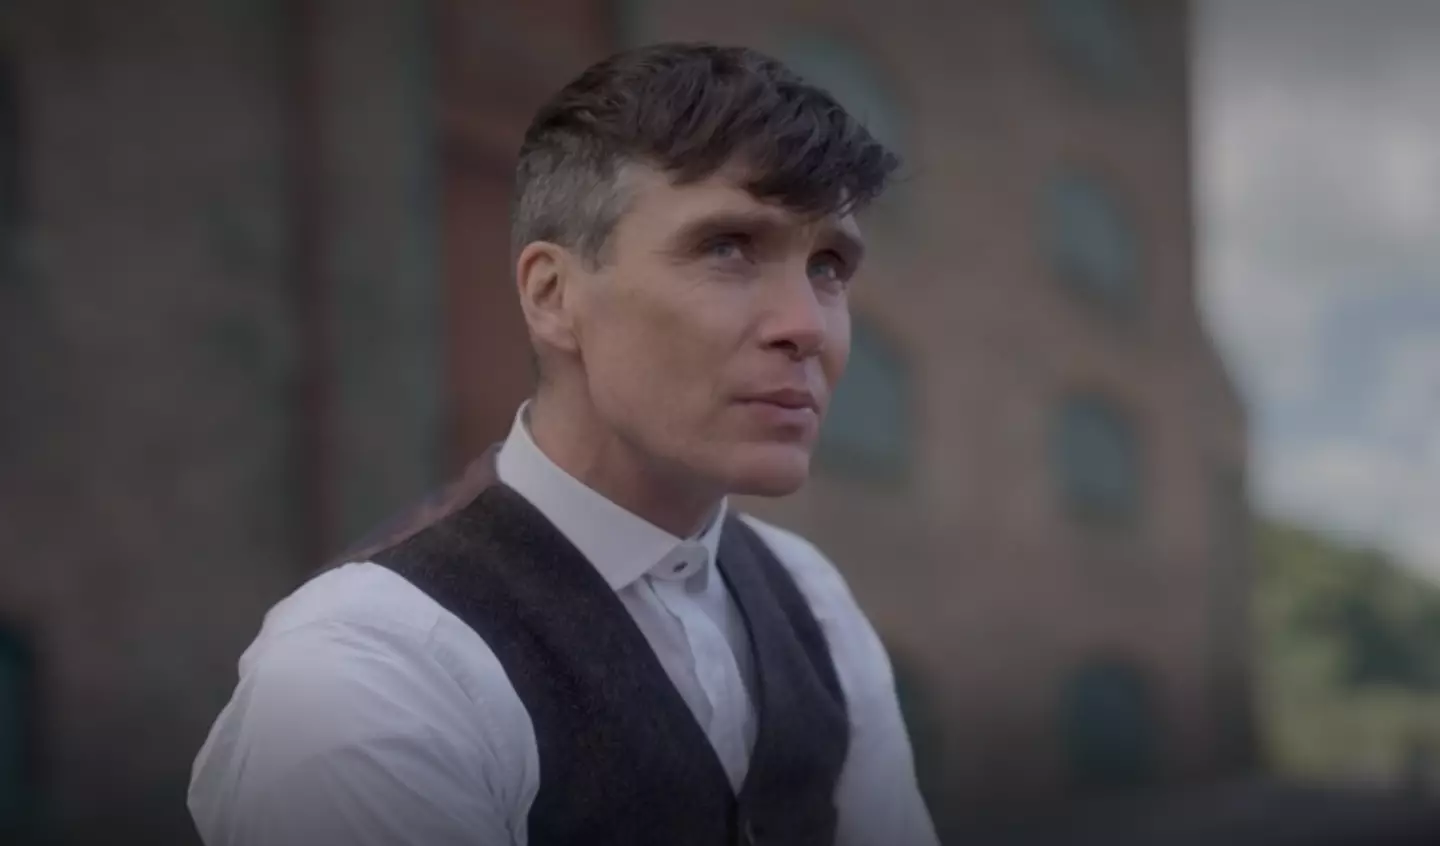 Tommy Shelby's lack of appetite was 'accidental', according to Cillian Murphy.